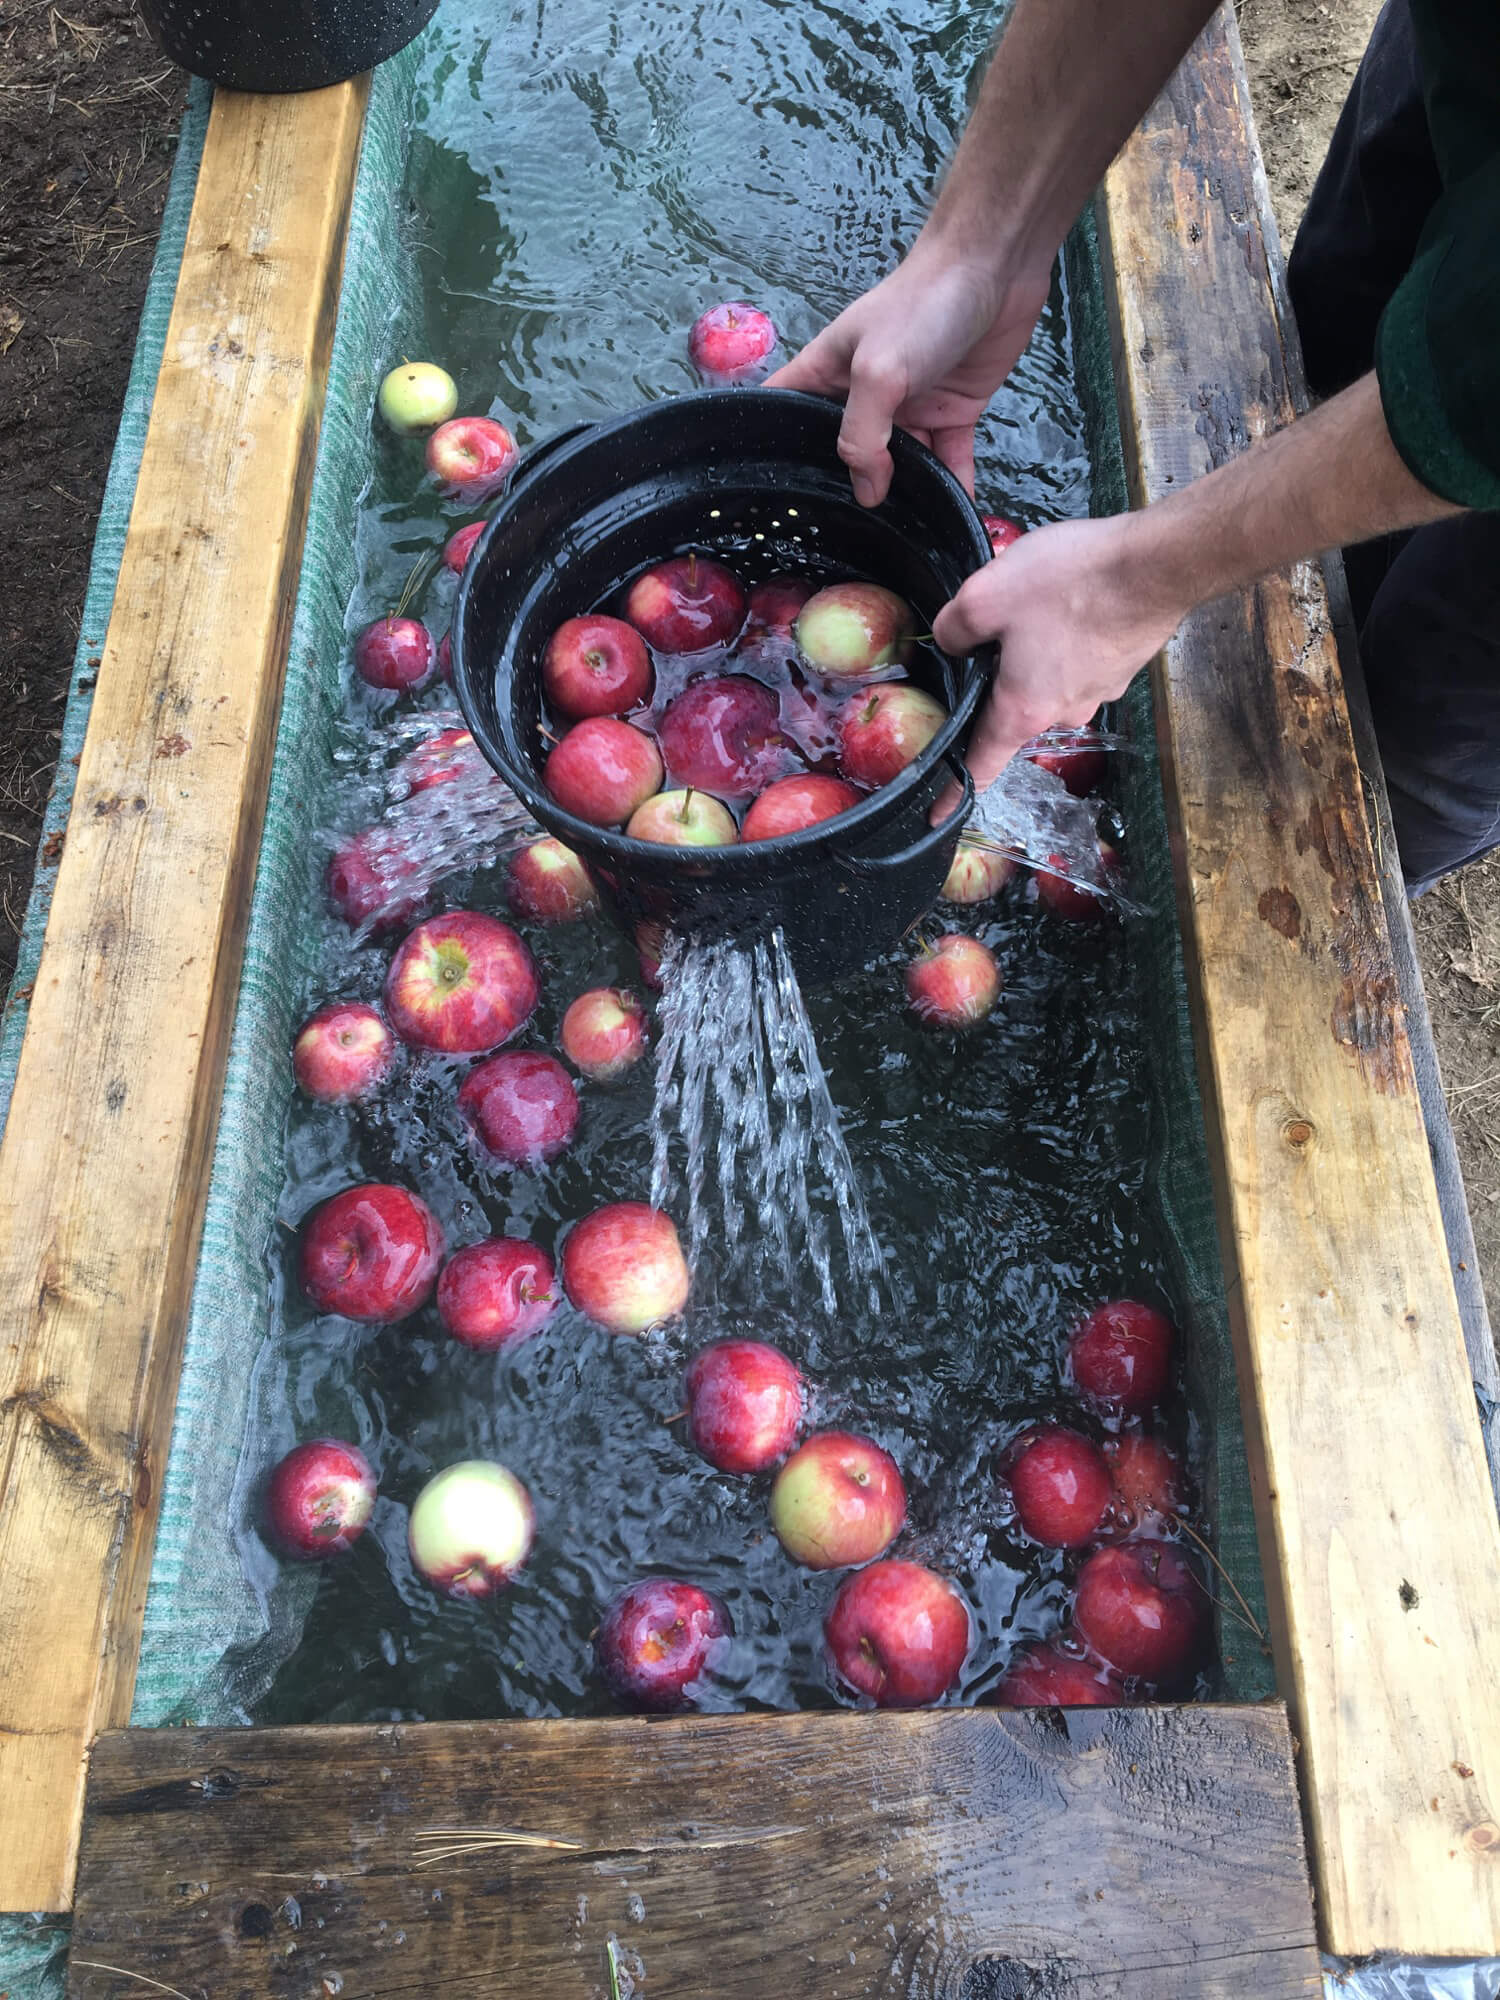 apples getting washed and put in bucket